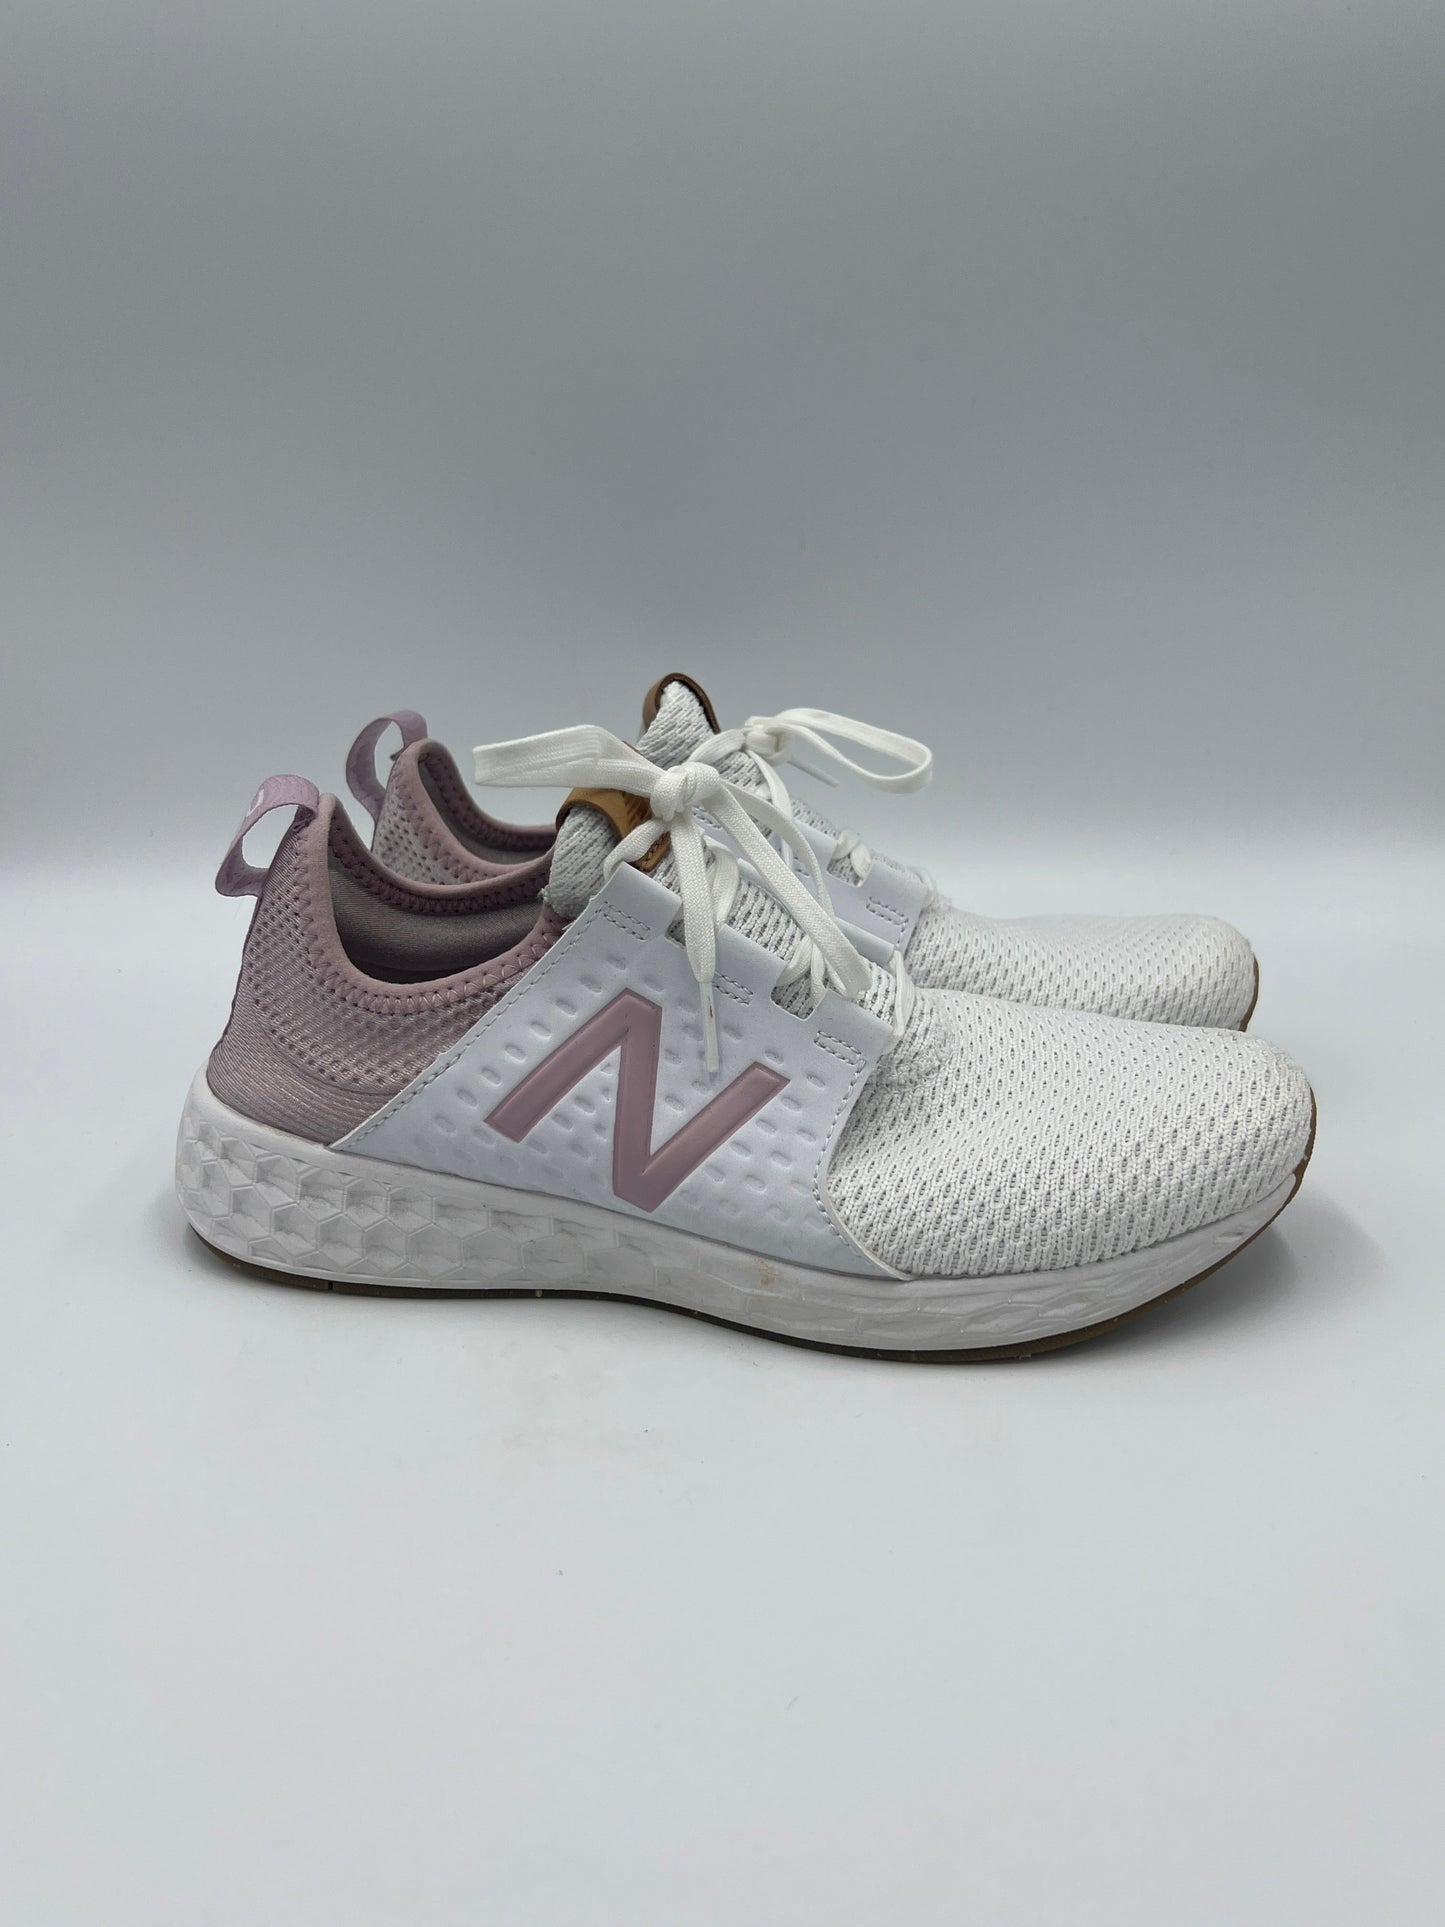 Shoes Athletic By New Balance  Size: 9